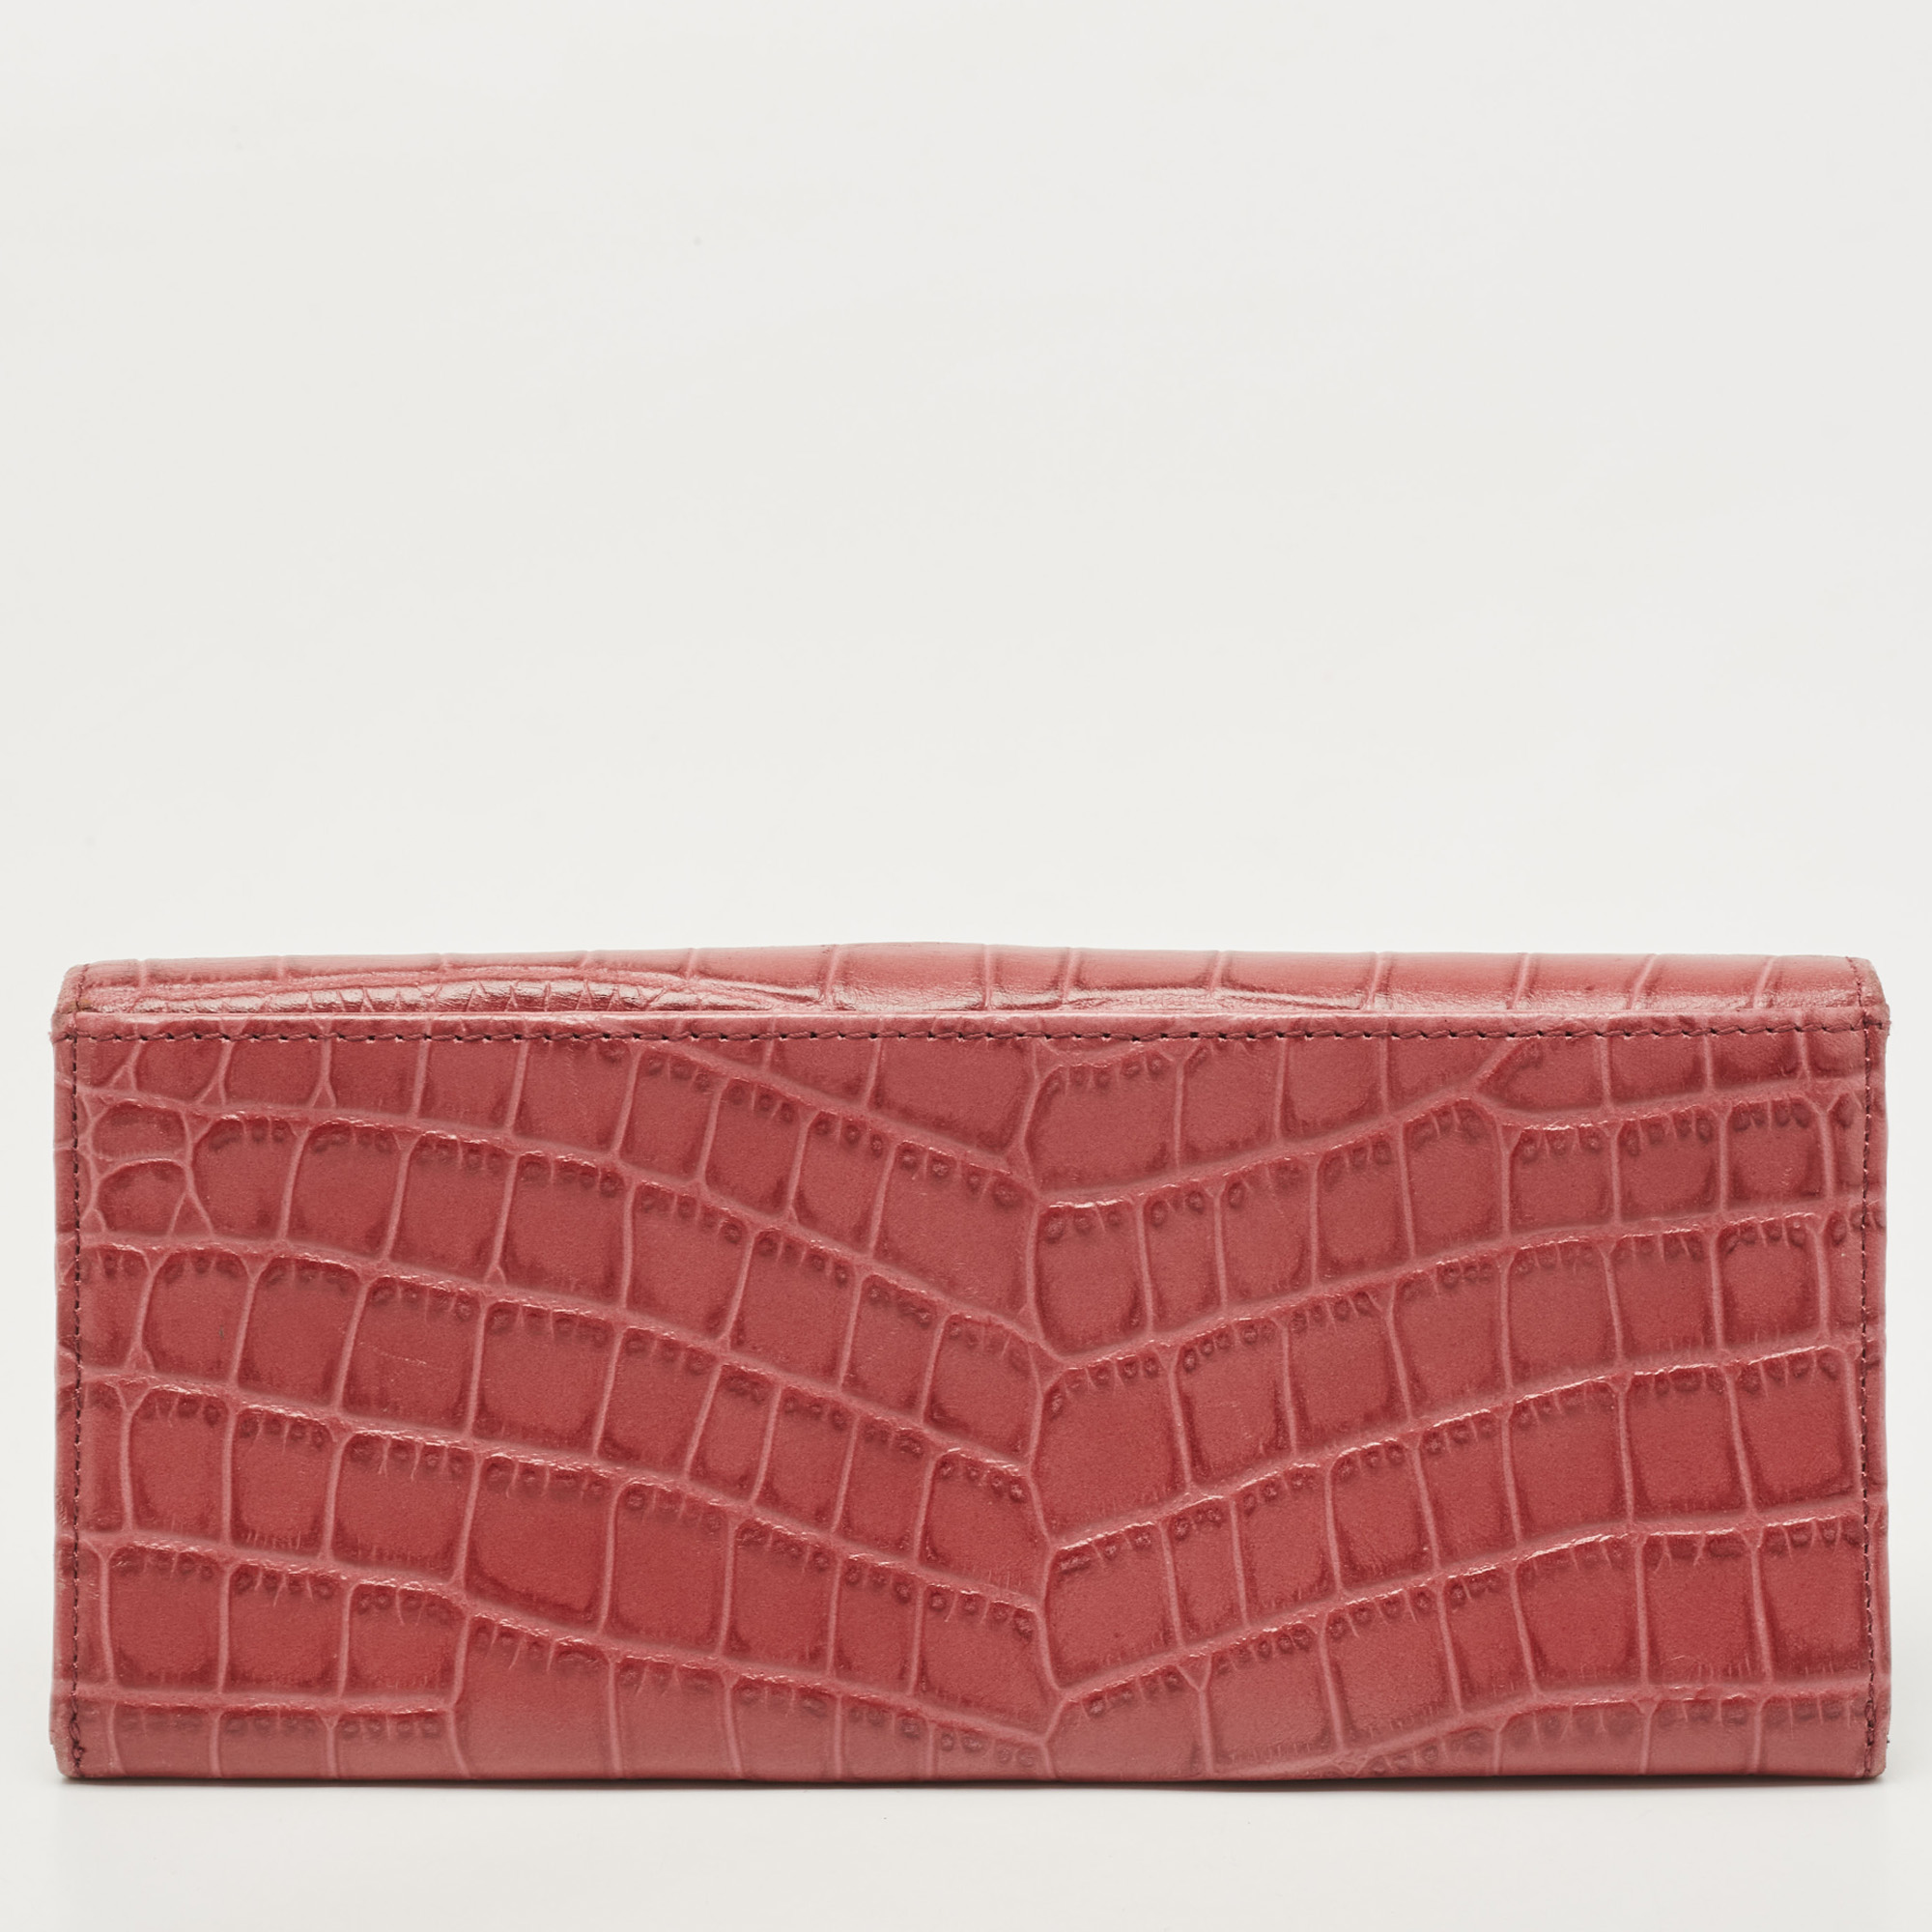 Aigner Pink Croc Embossed Leather Continental Wallet